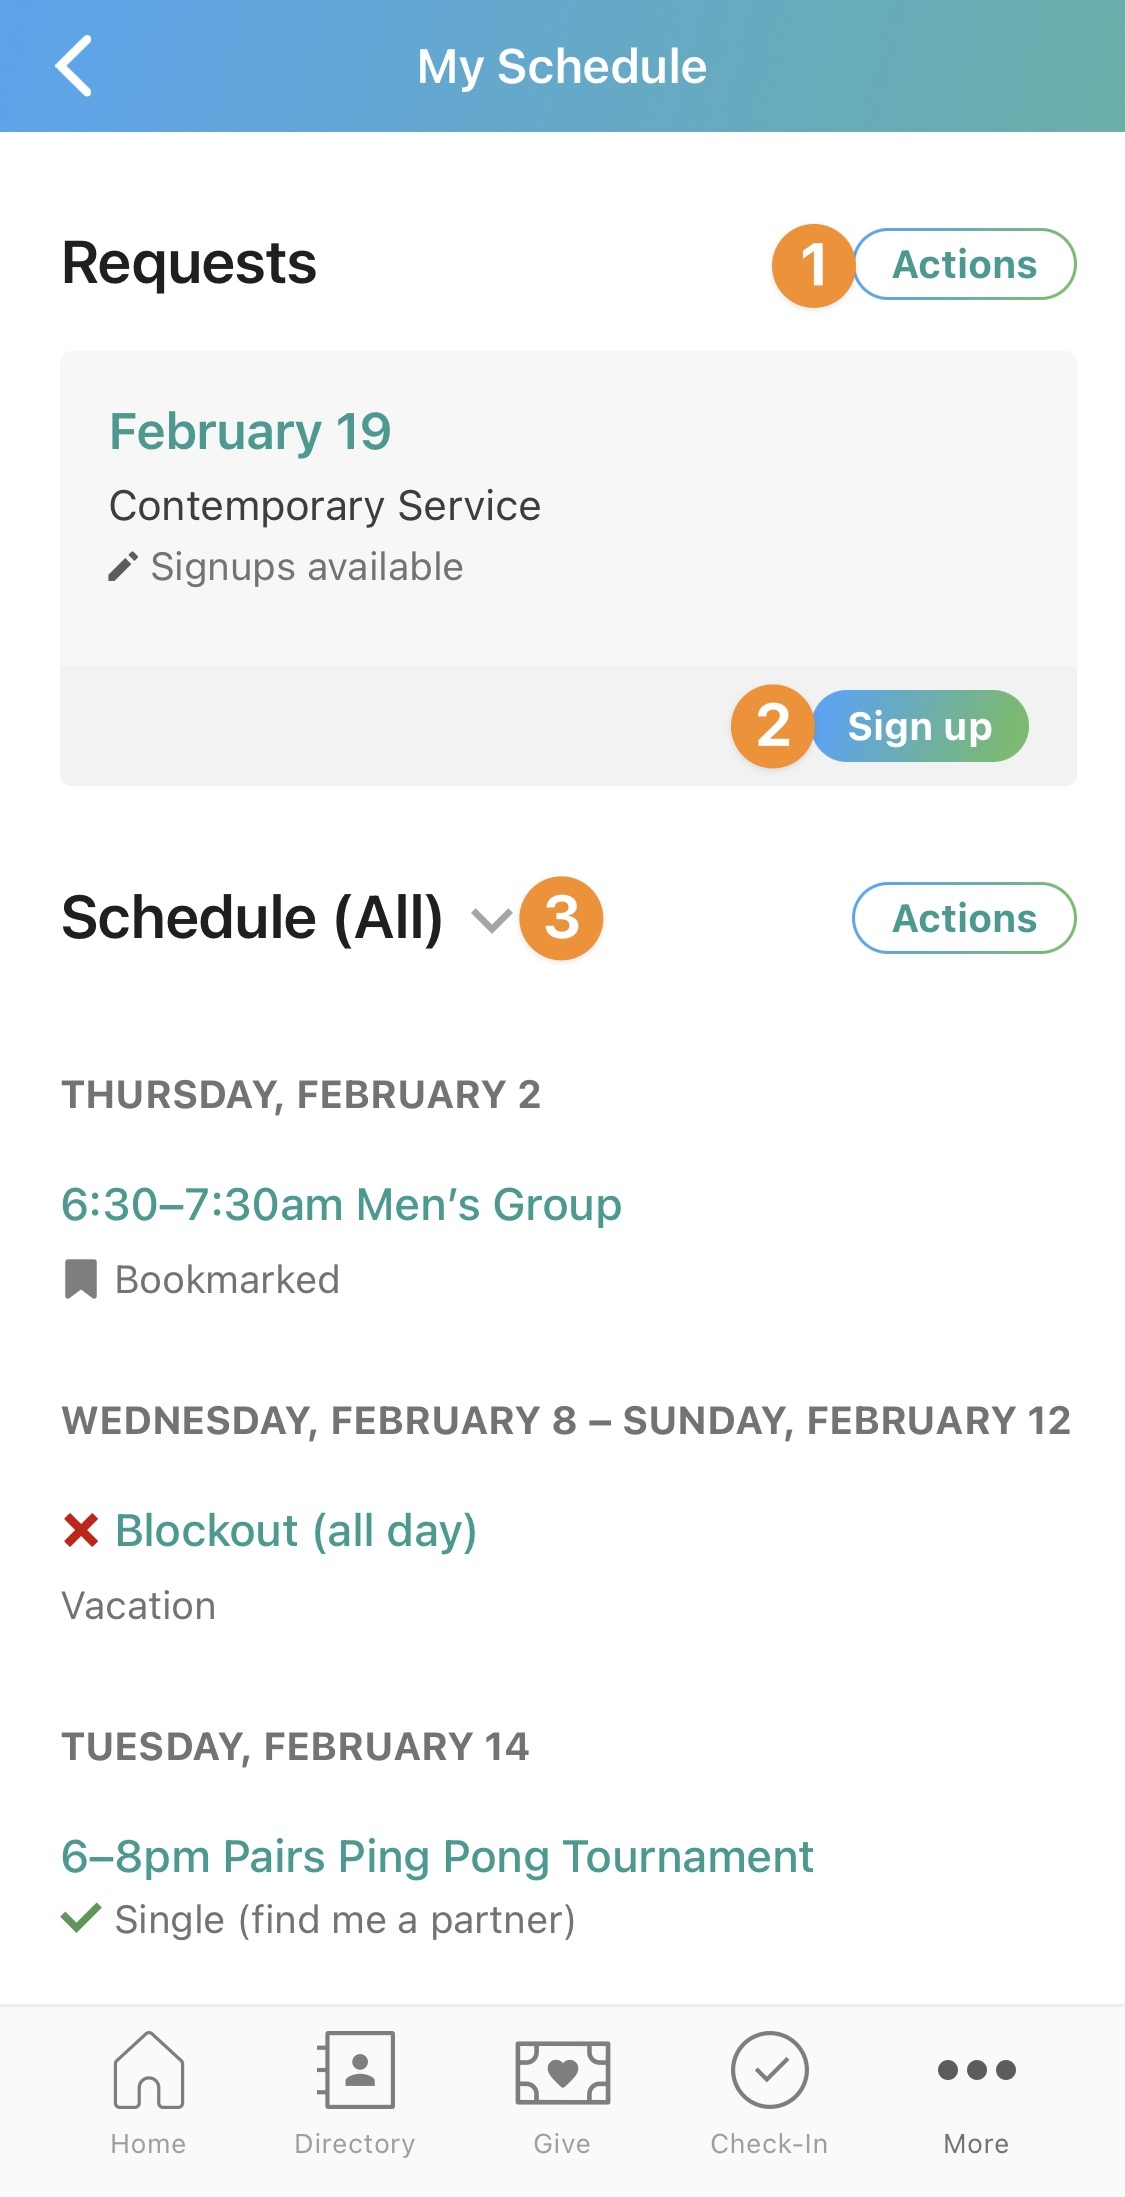 ccw_myschedule_numbered.png